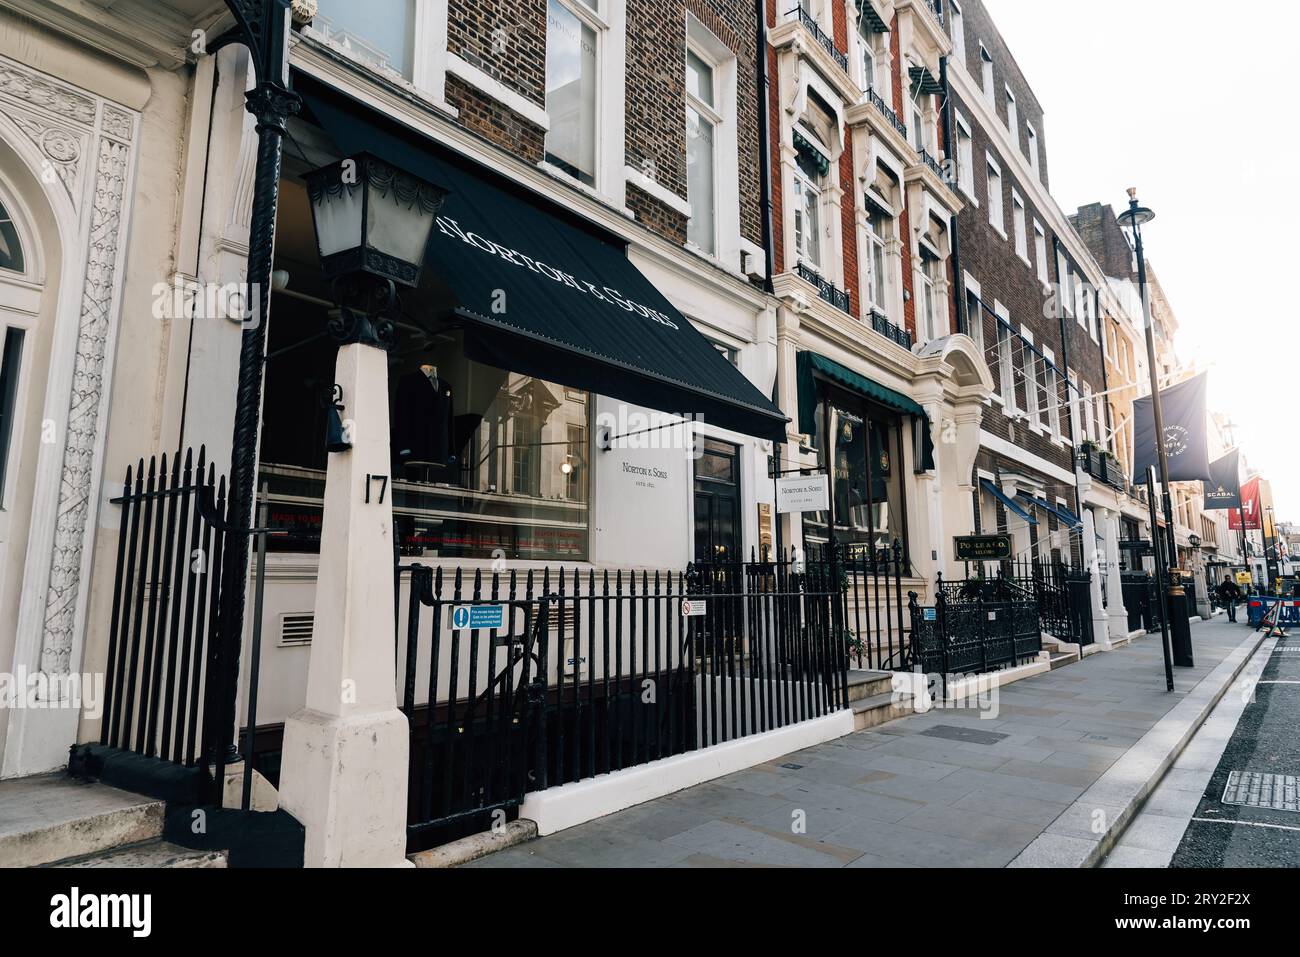 London, UK - August 27, 2023: View of Savile Row. Savile Row is a street in Mayfair, central London. Known principally for its traditional bespoke tai Stock Photo